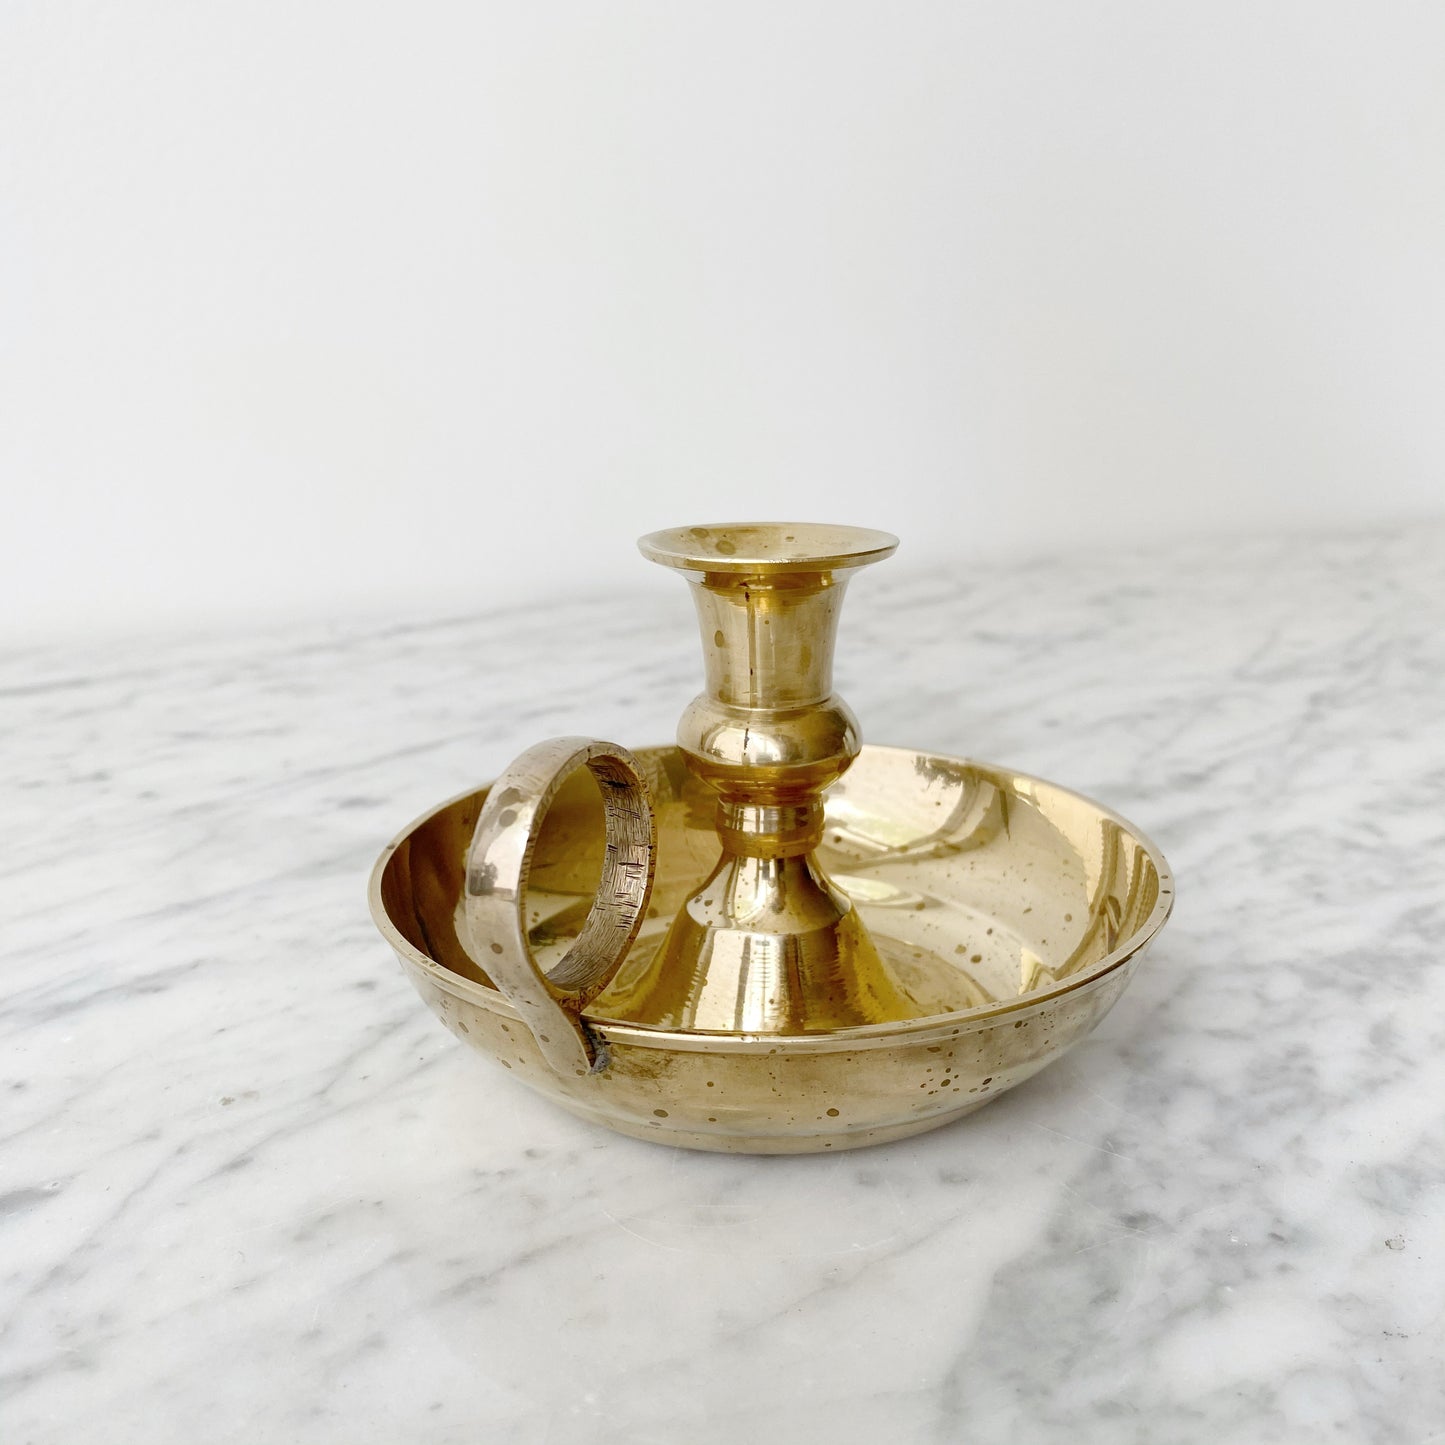 Vintage Solid Brass Candle Holder with Drip Tray